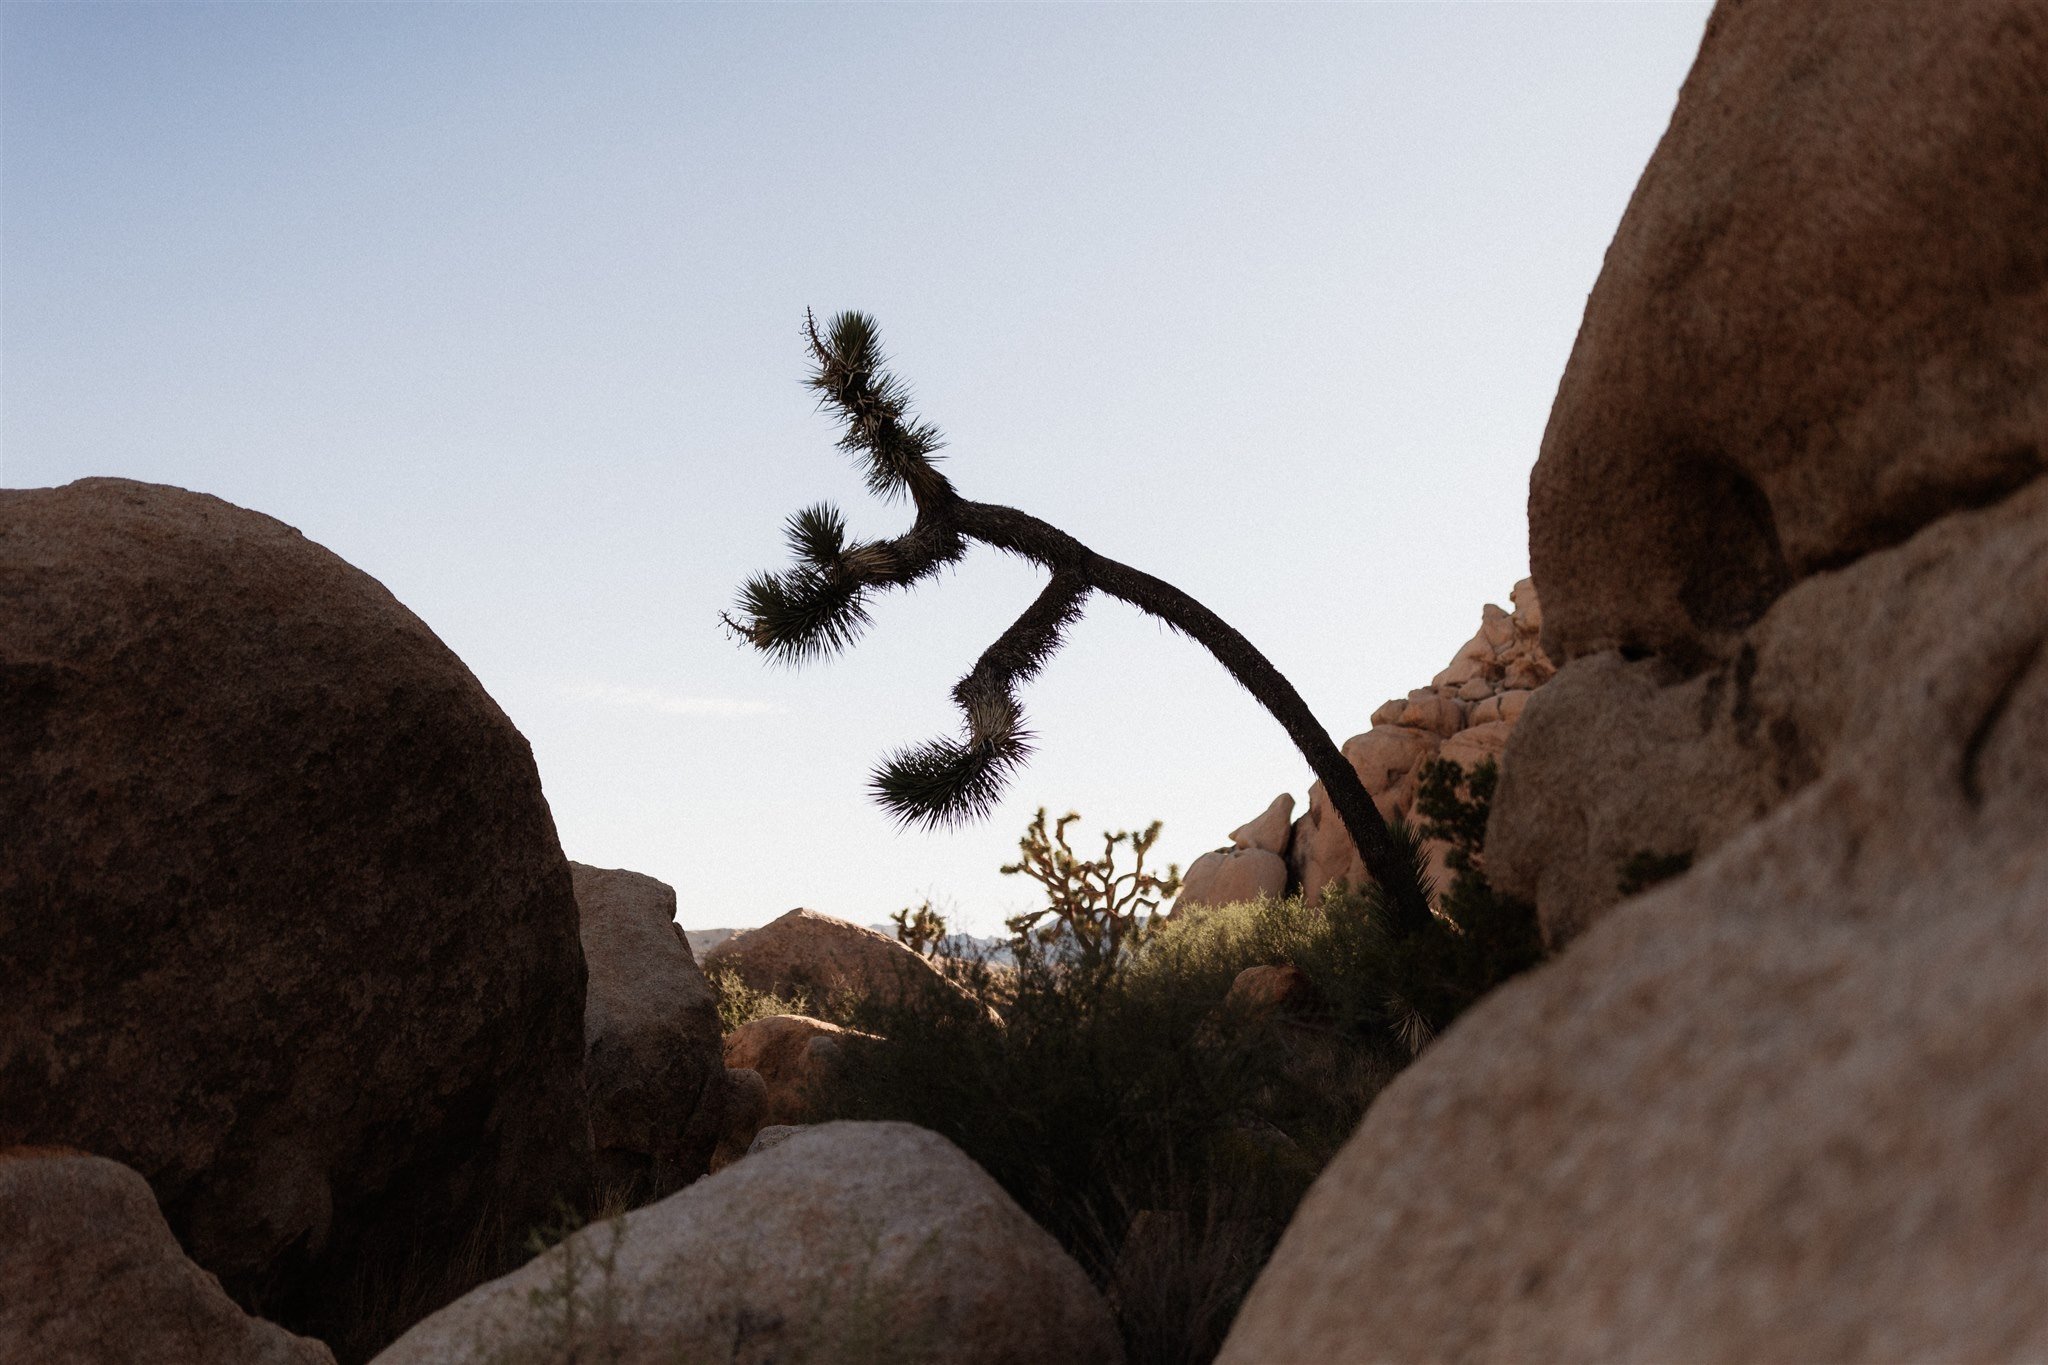 Joshua Tree Couples Session Surprise Proposal - Will Khoury Photography_18.jpg